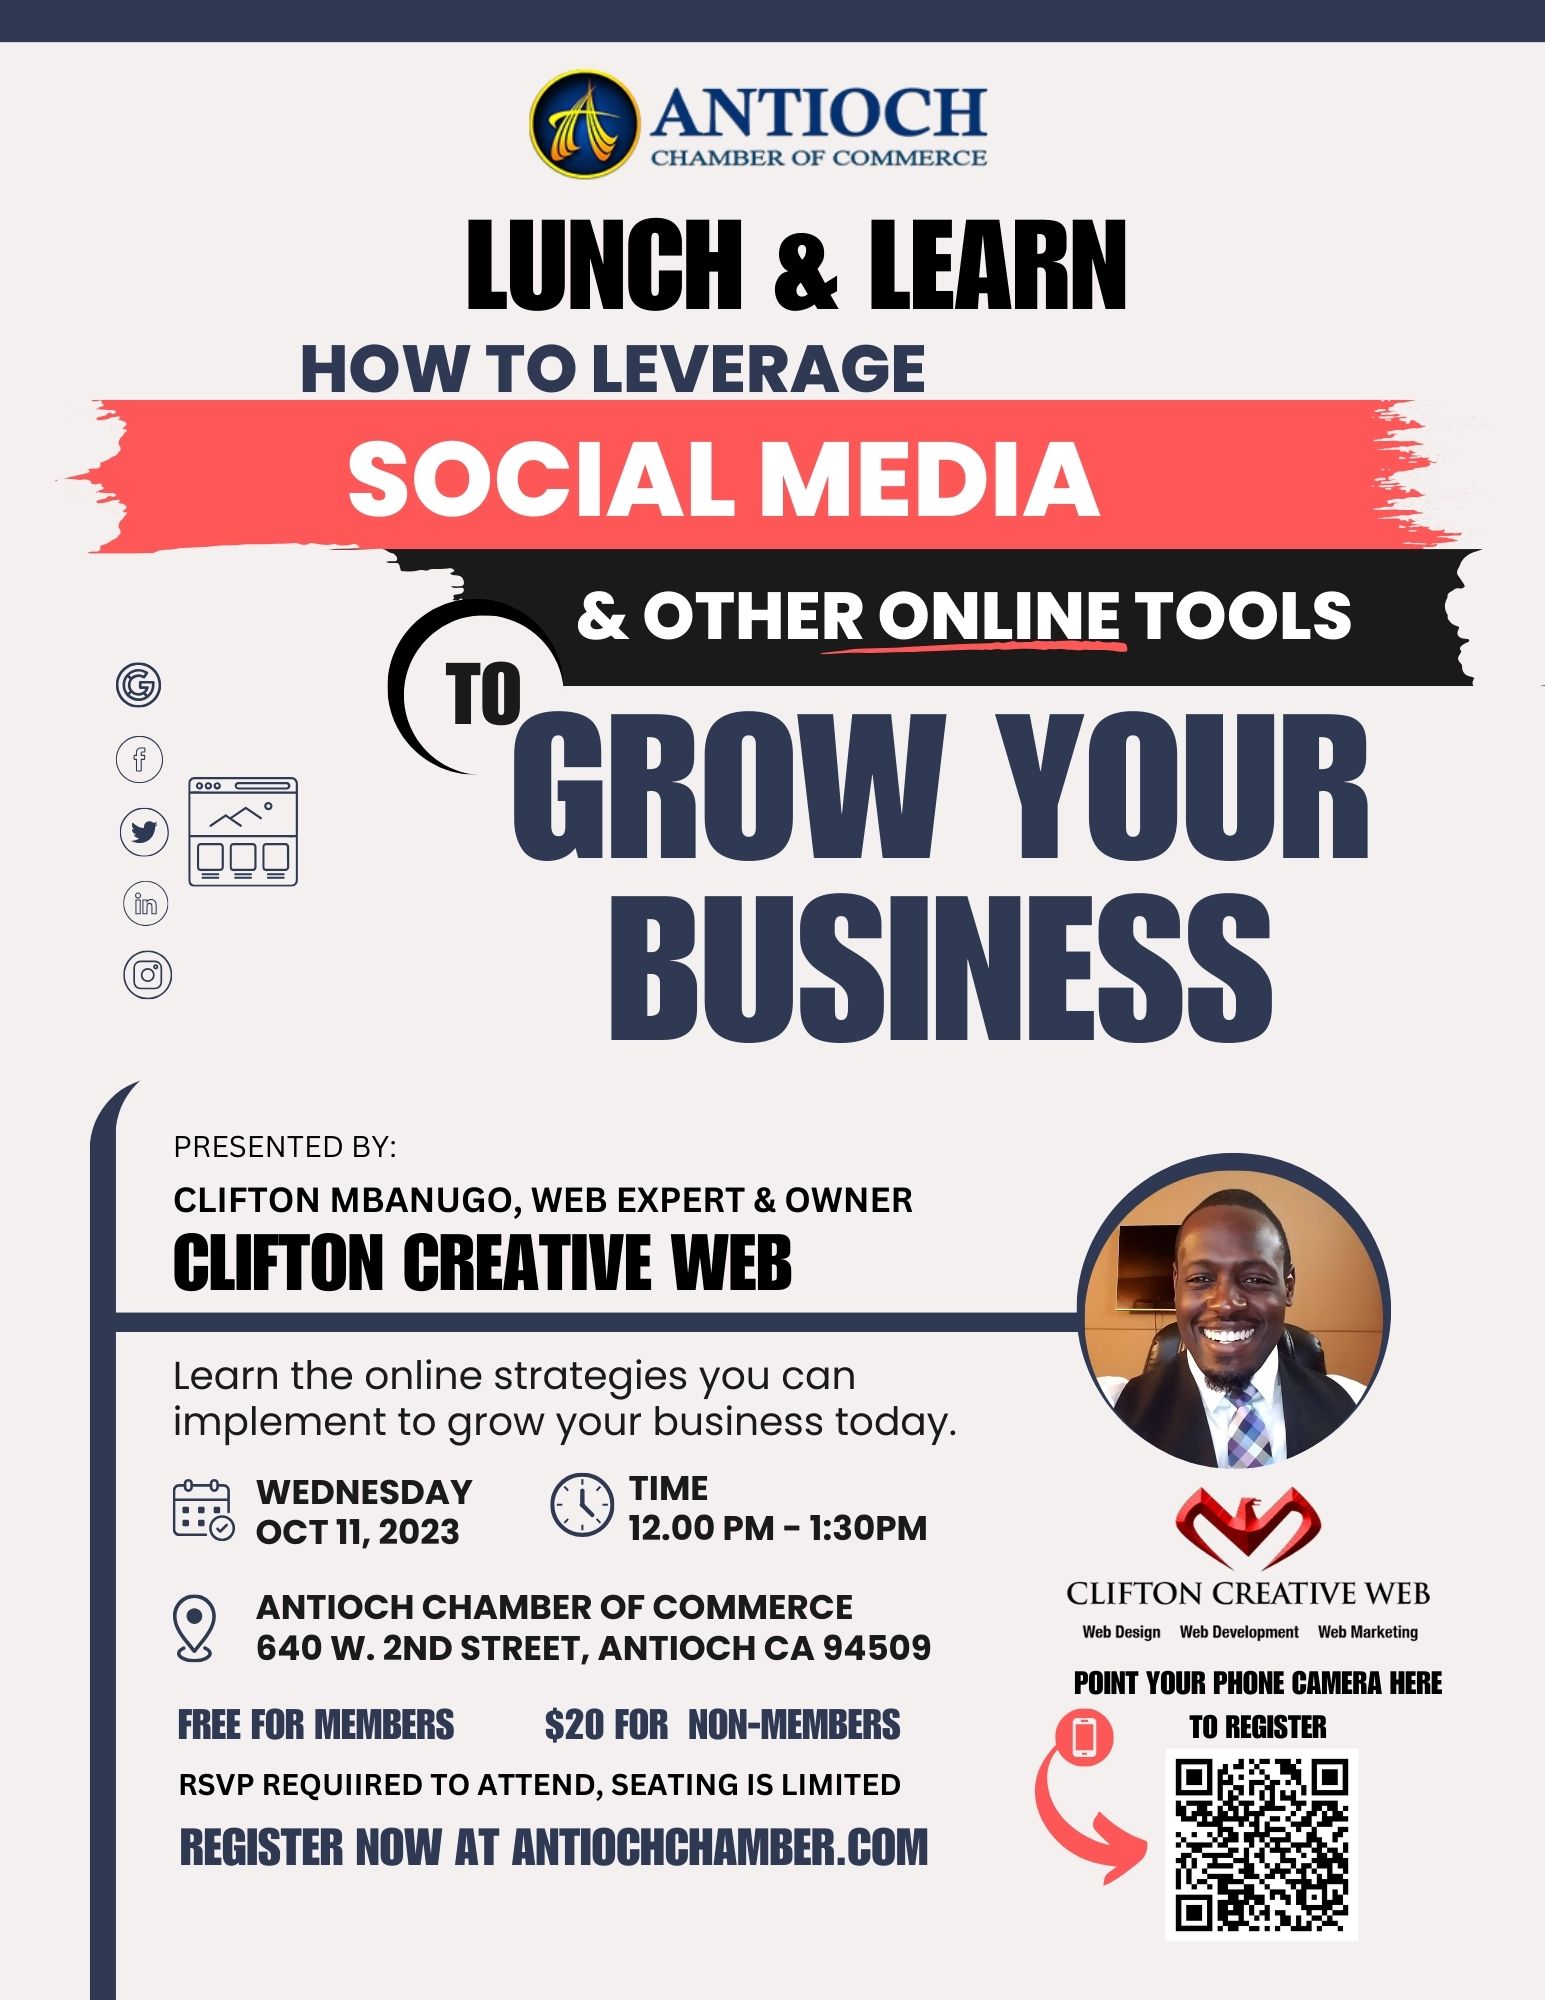 Lunch and Learn Flyer OCT 11